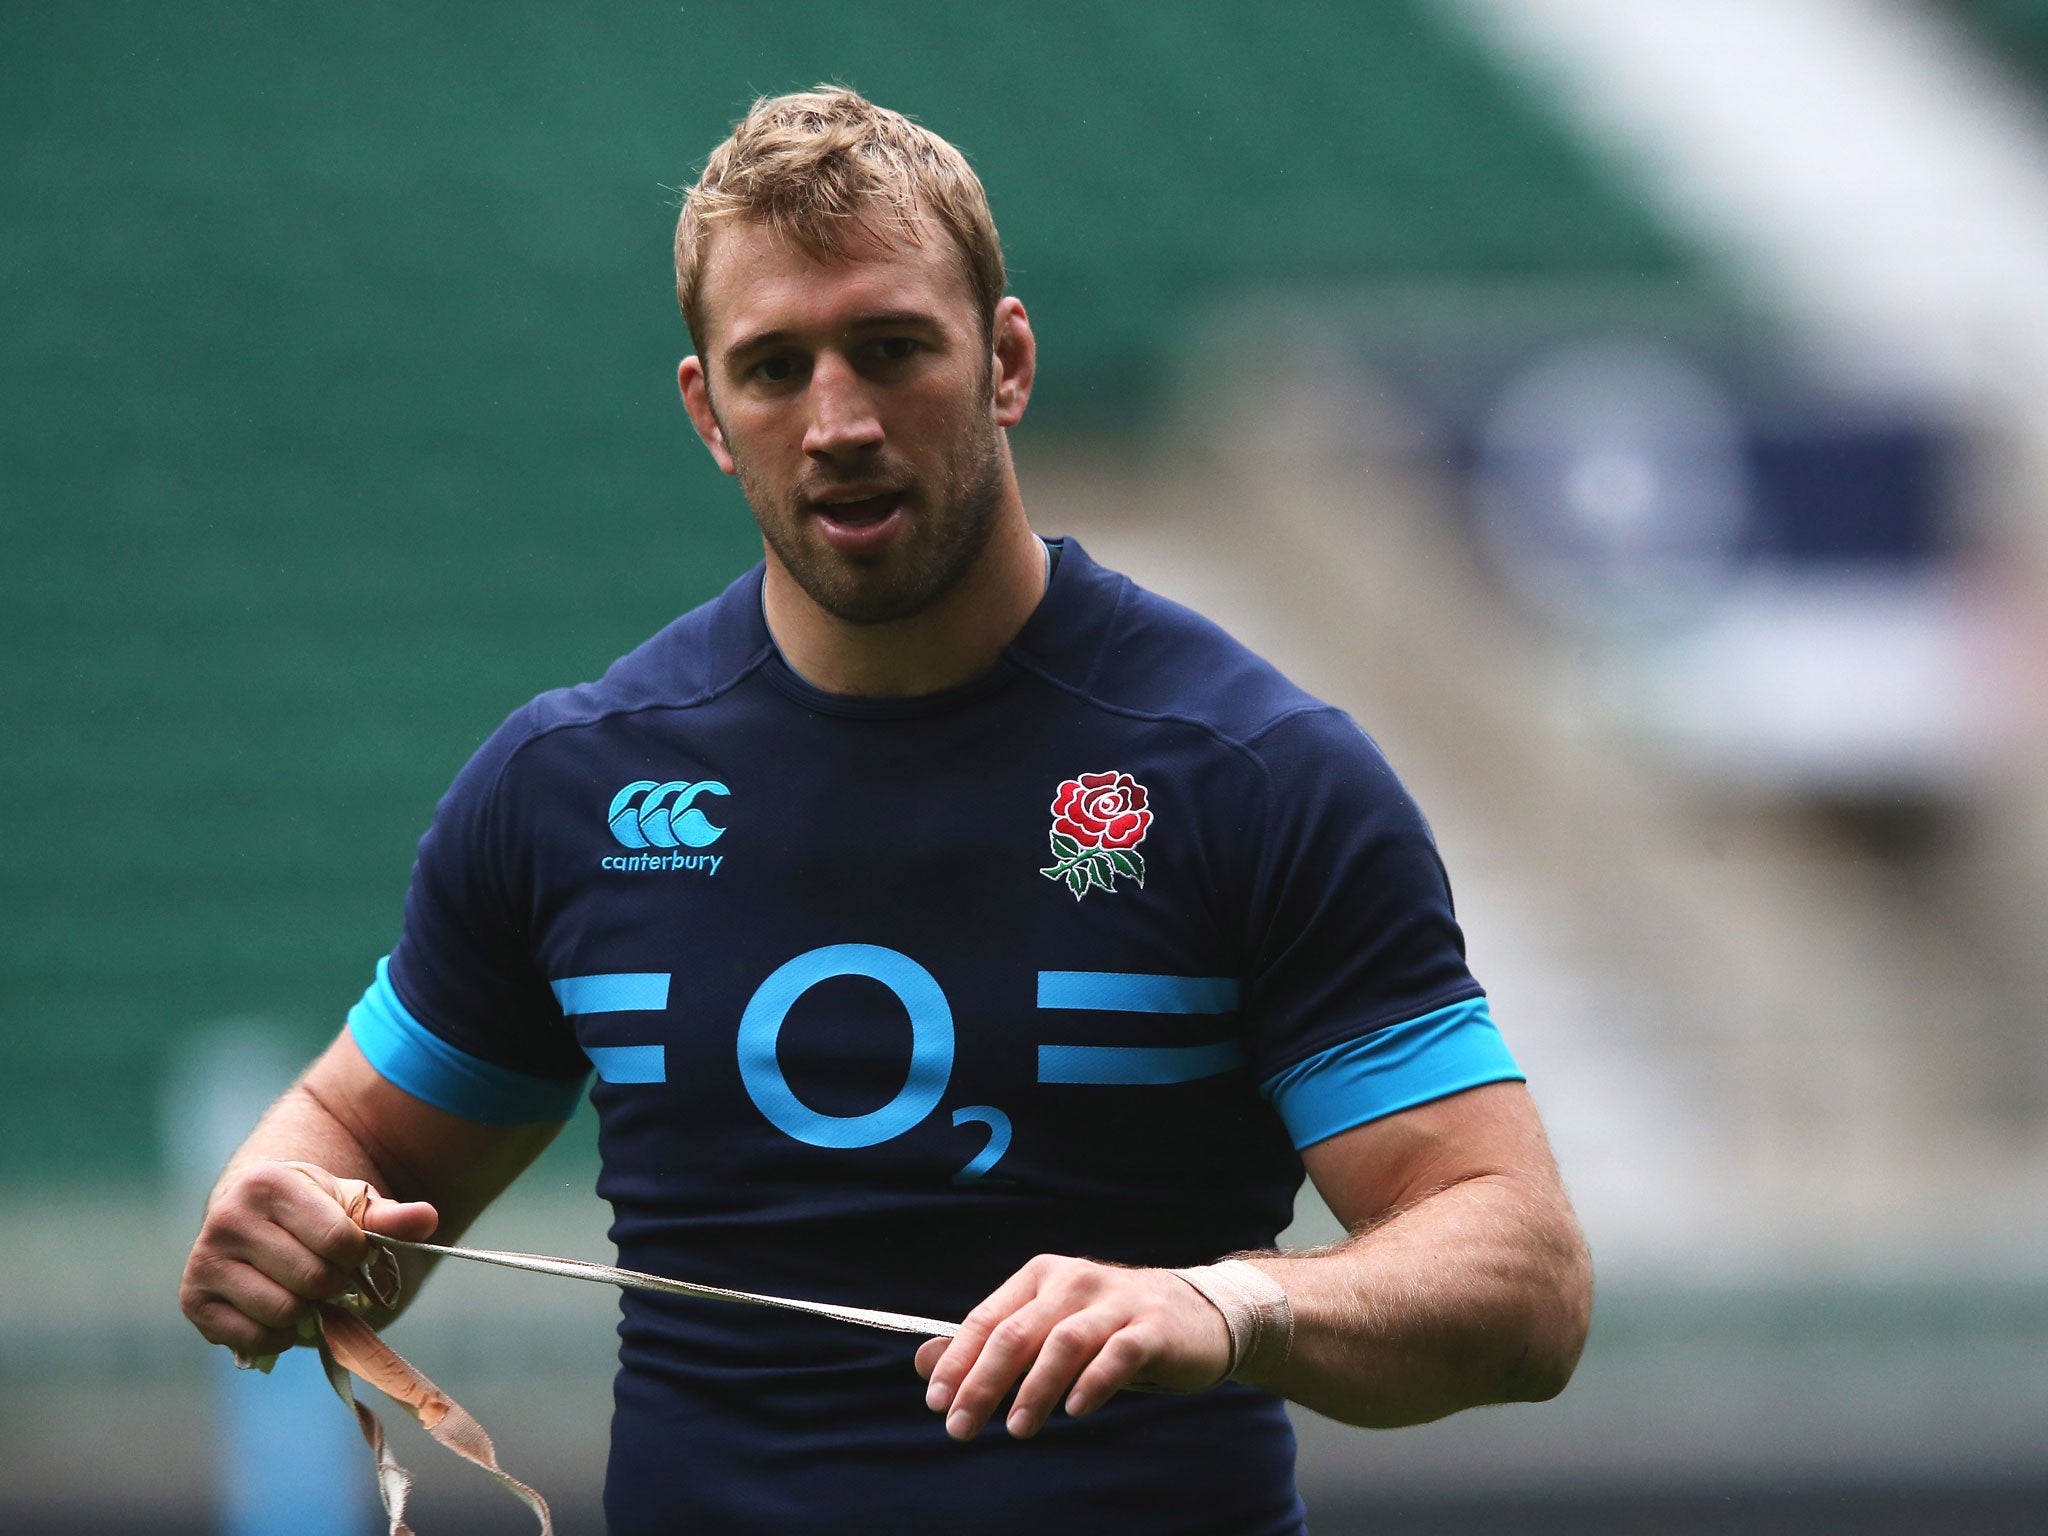 Chris Robshaw brings a welcome measure of consistency to the captain's role